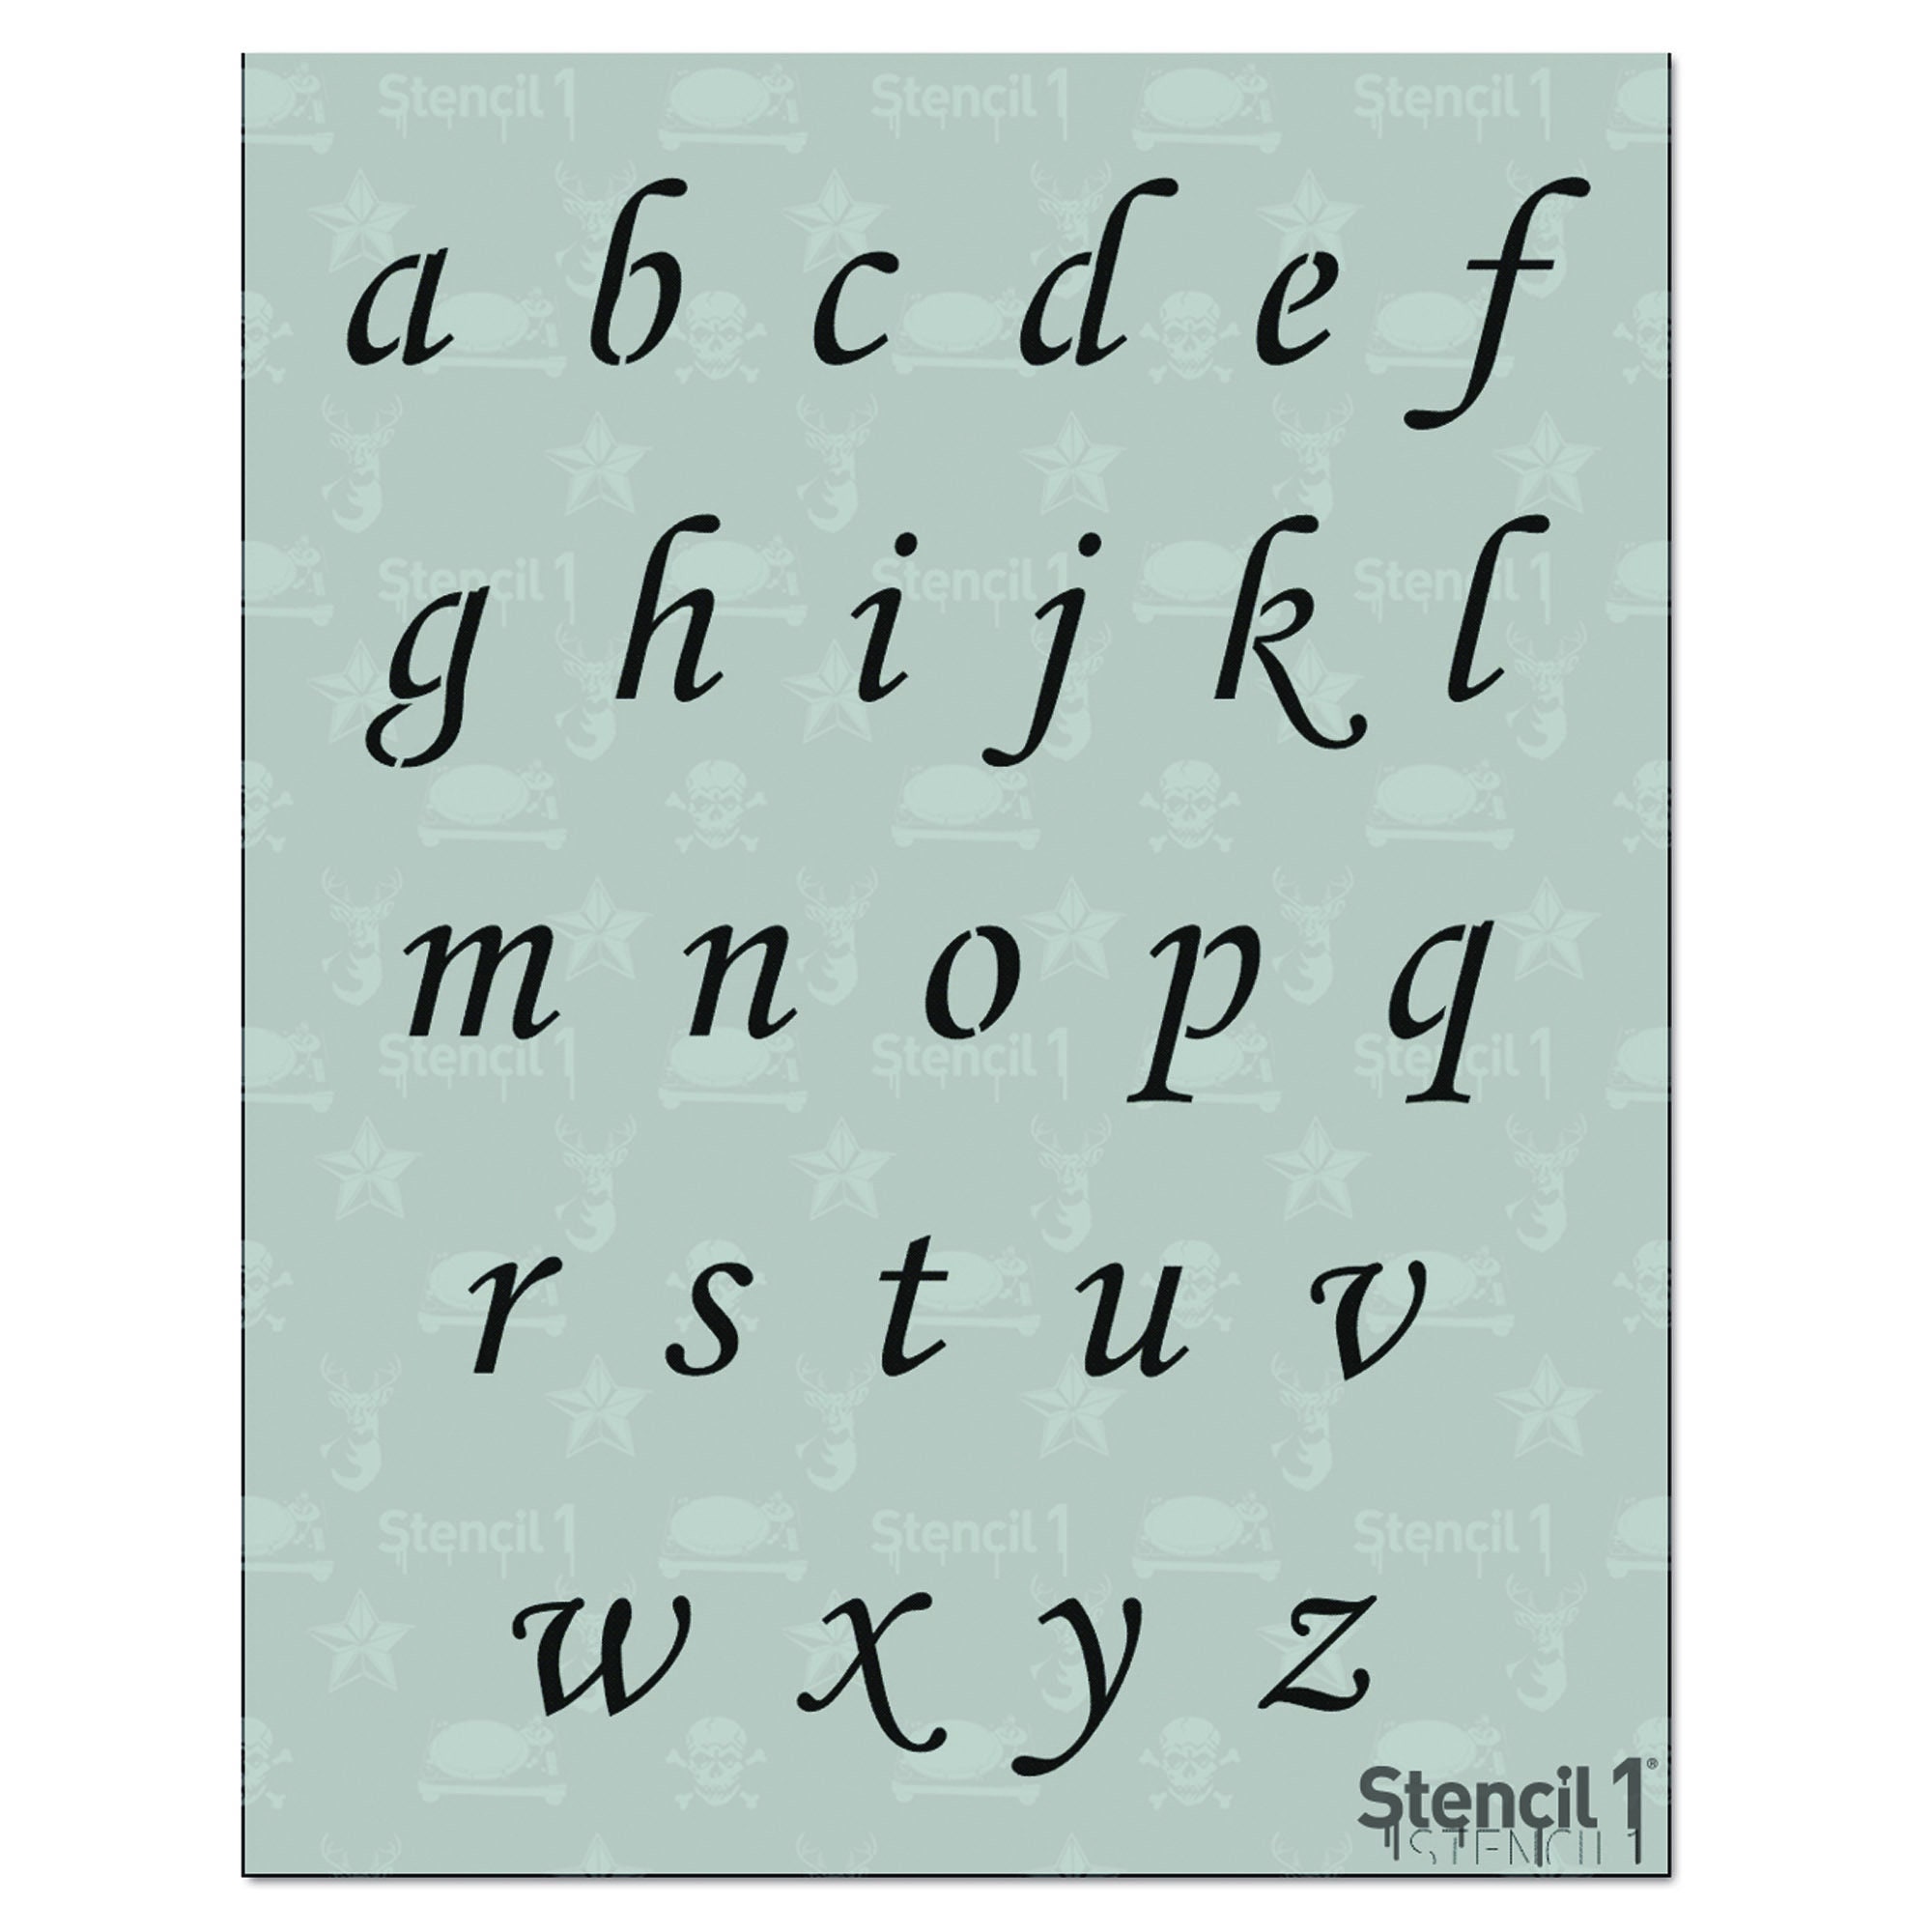 DZXCYZ 1 Inch Letter Stencils Kits, 66 Pcs Calligraphy Alphabet Stencils  and Number Stencils for Painting on Wood, Cursive Lettering Stencil Upper  and